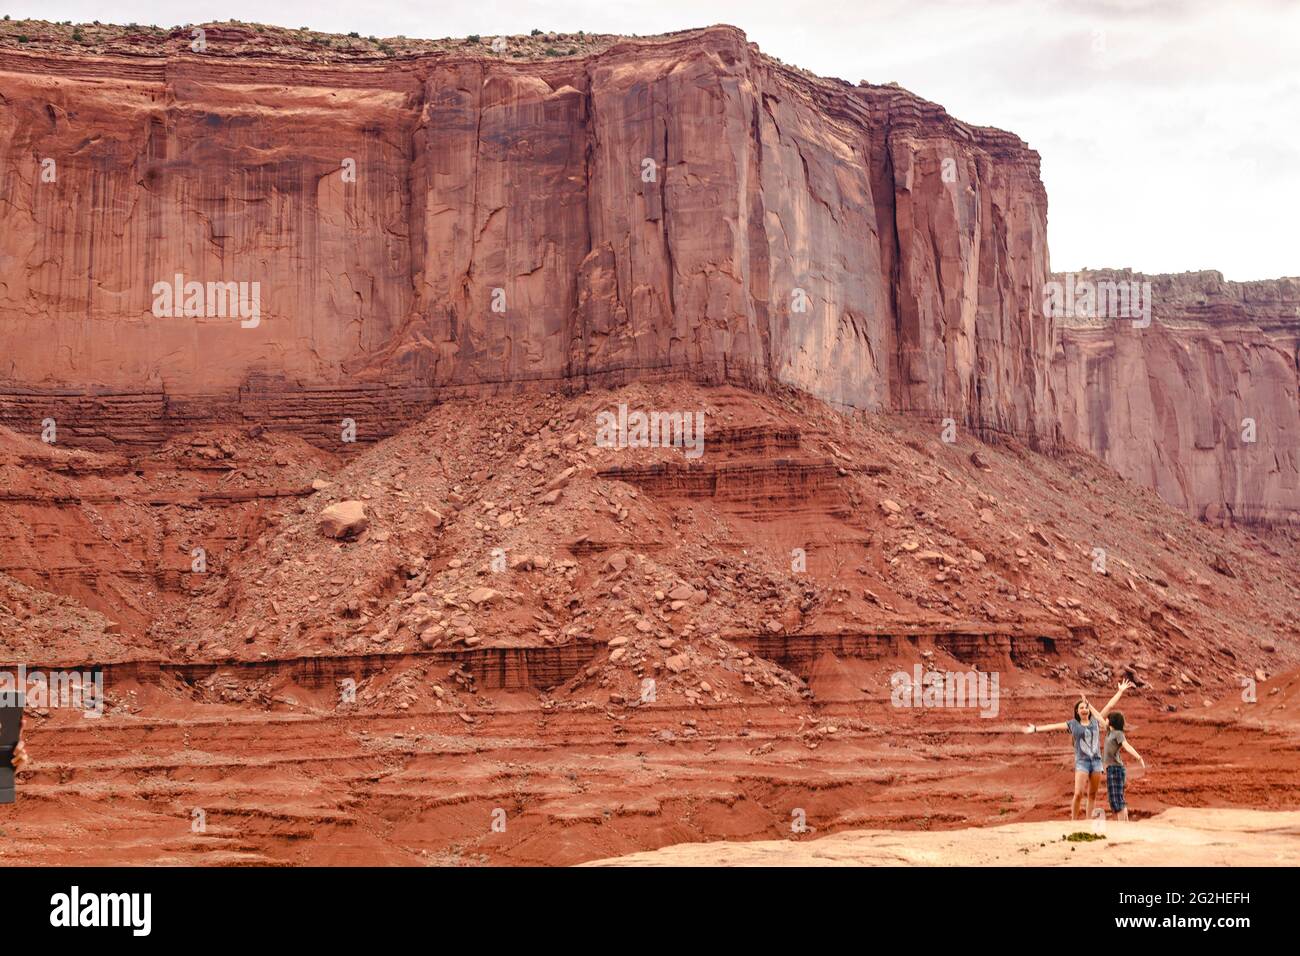 John Ford Point - a lookout with sweeping vistas of craggy buttes, named after the director who show several Movies here at Monument Valley, Arizona, USA Stock Photo